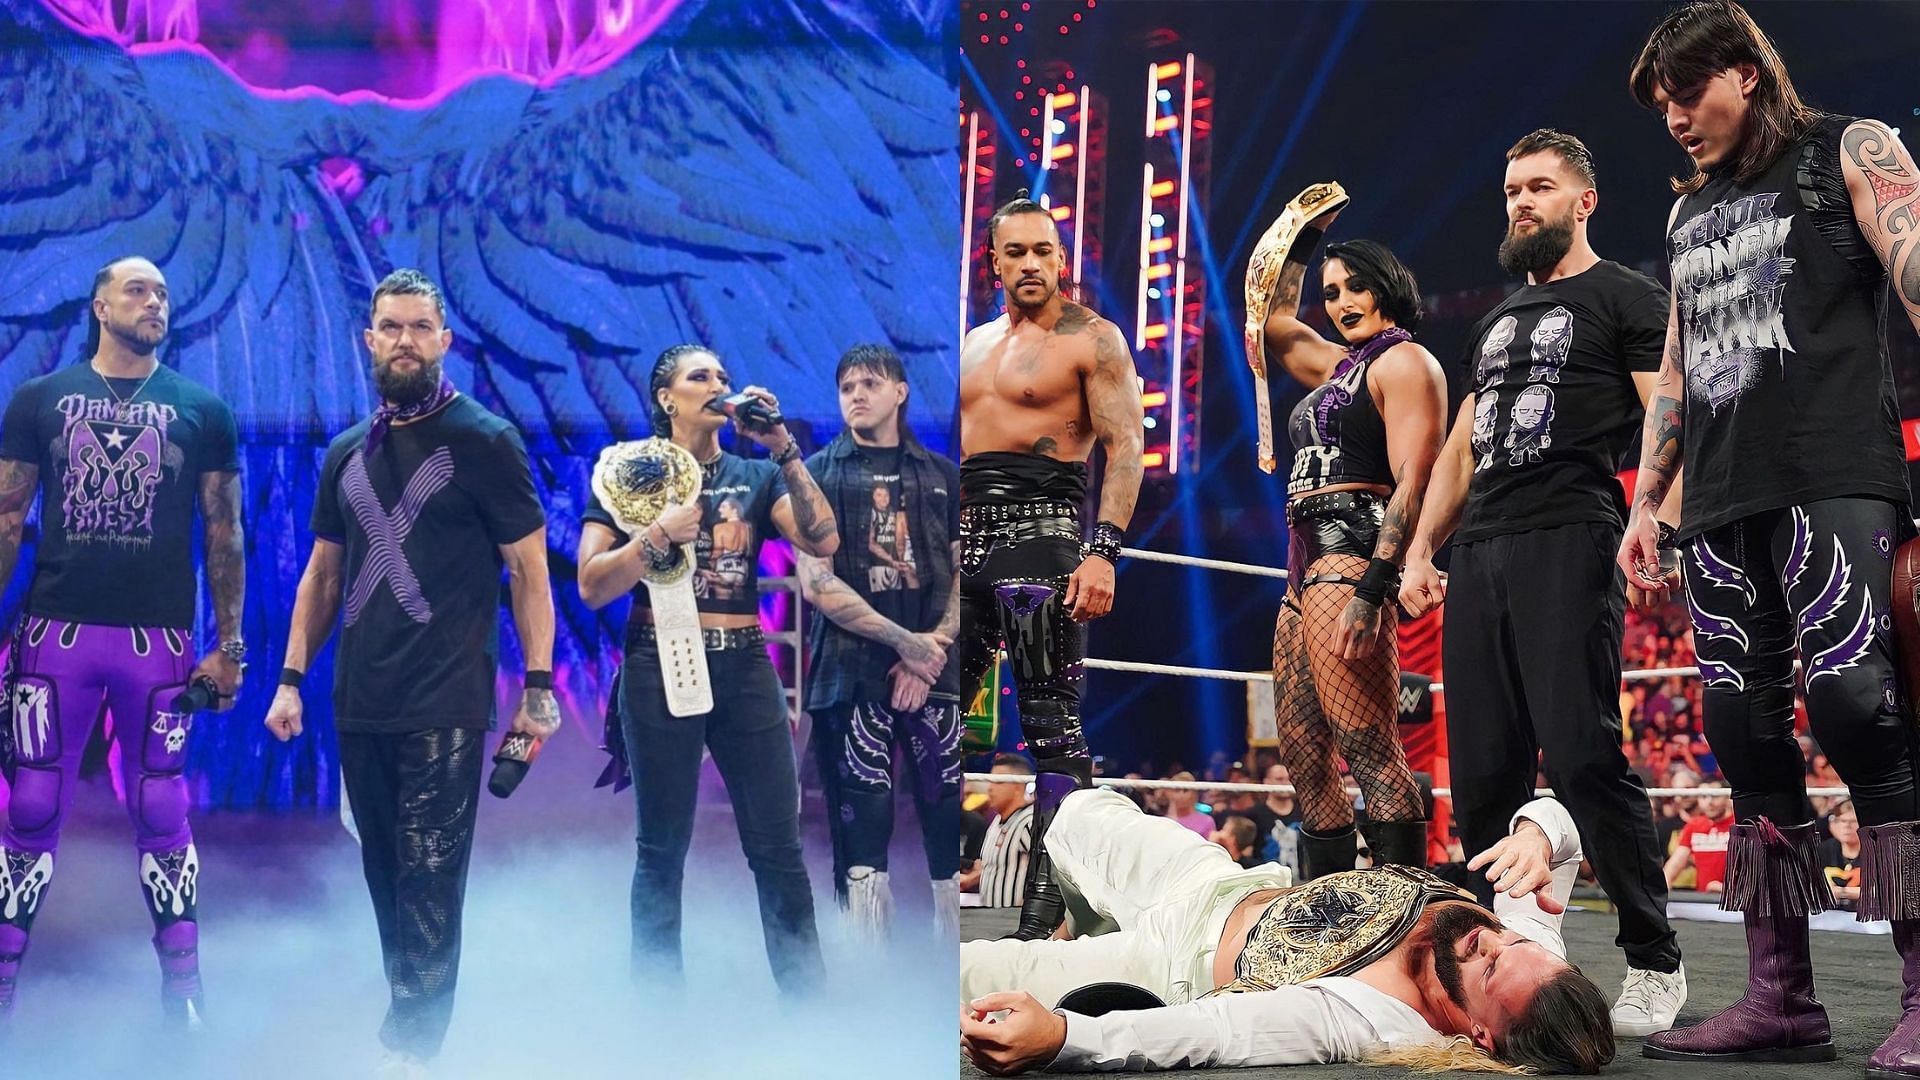 The Judgment Day is quite possibly the most dominant faction in WWE right now